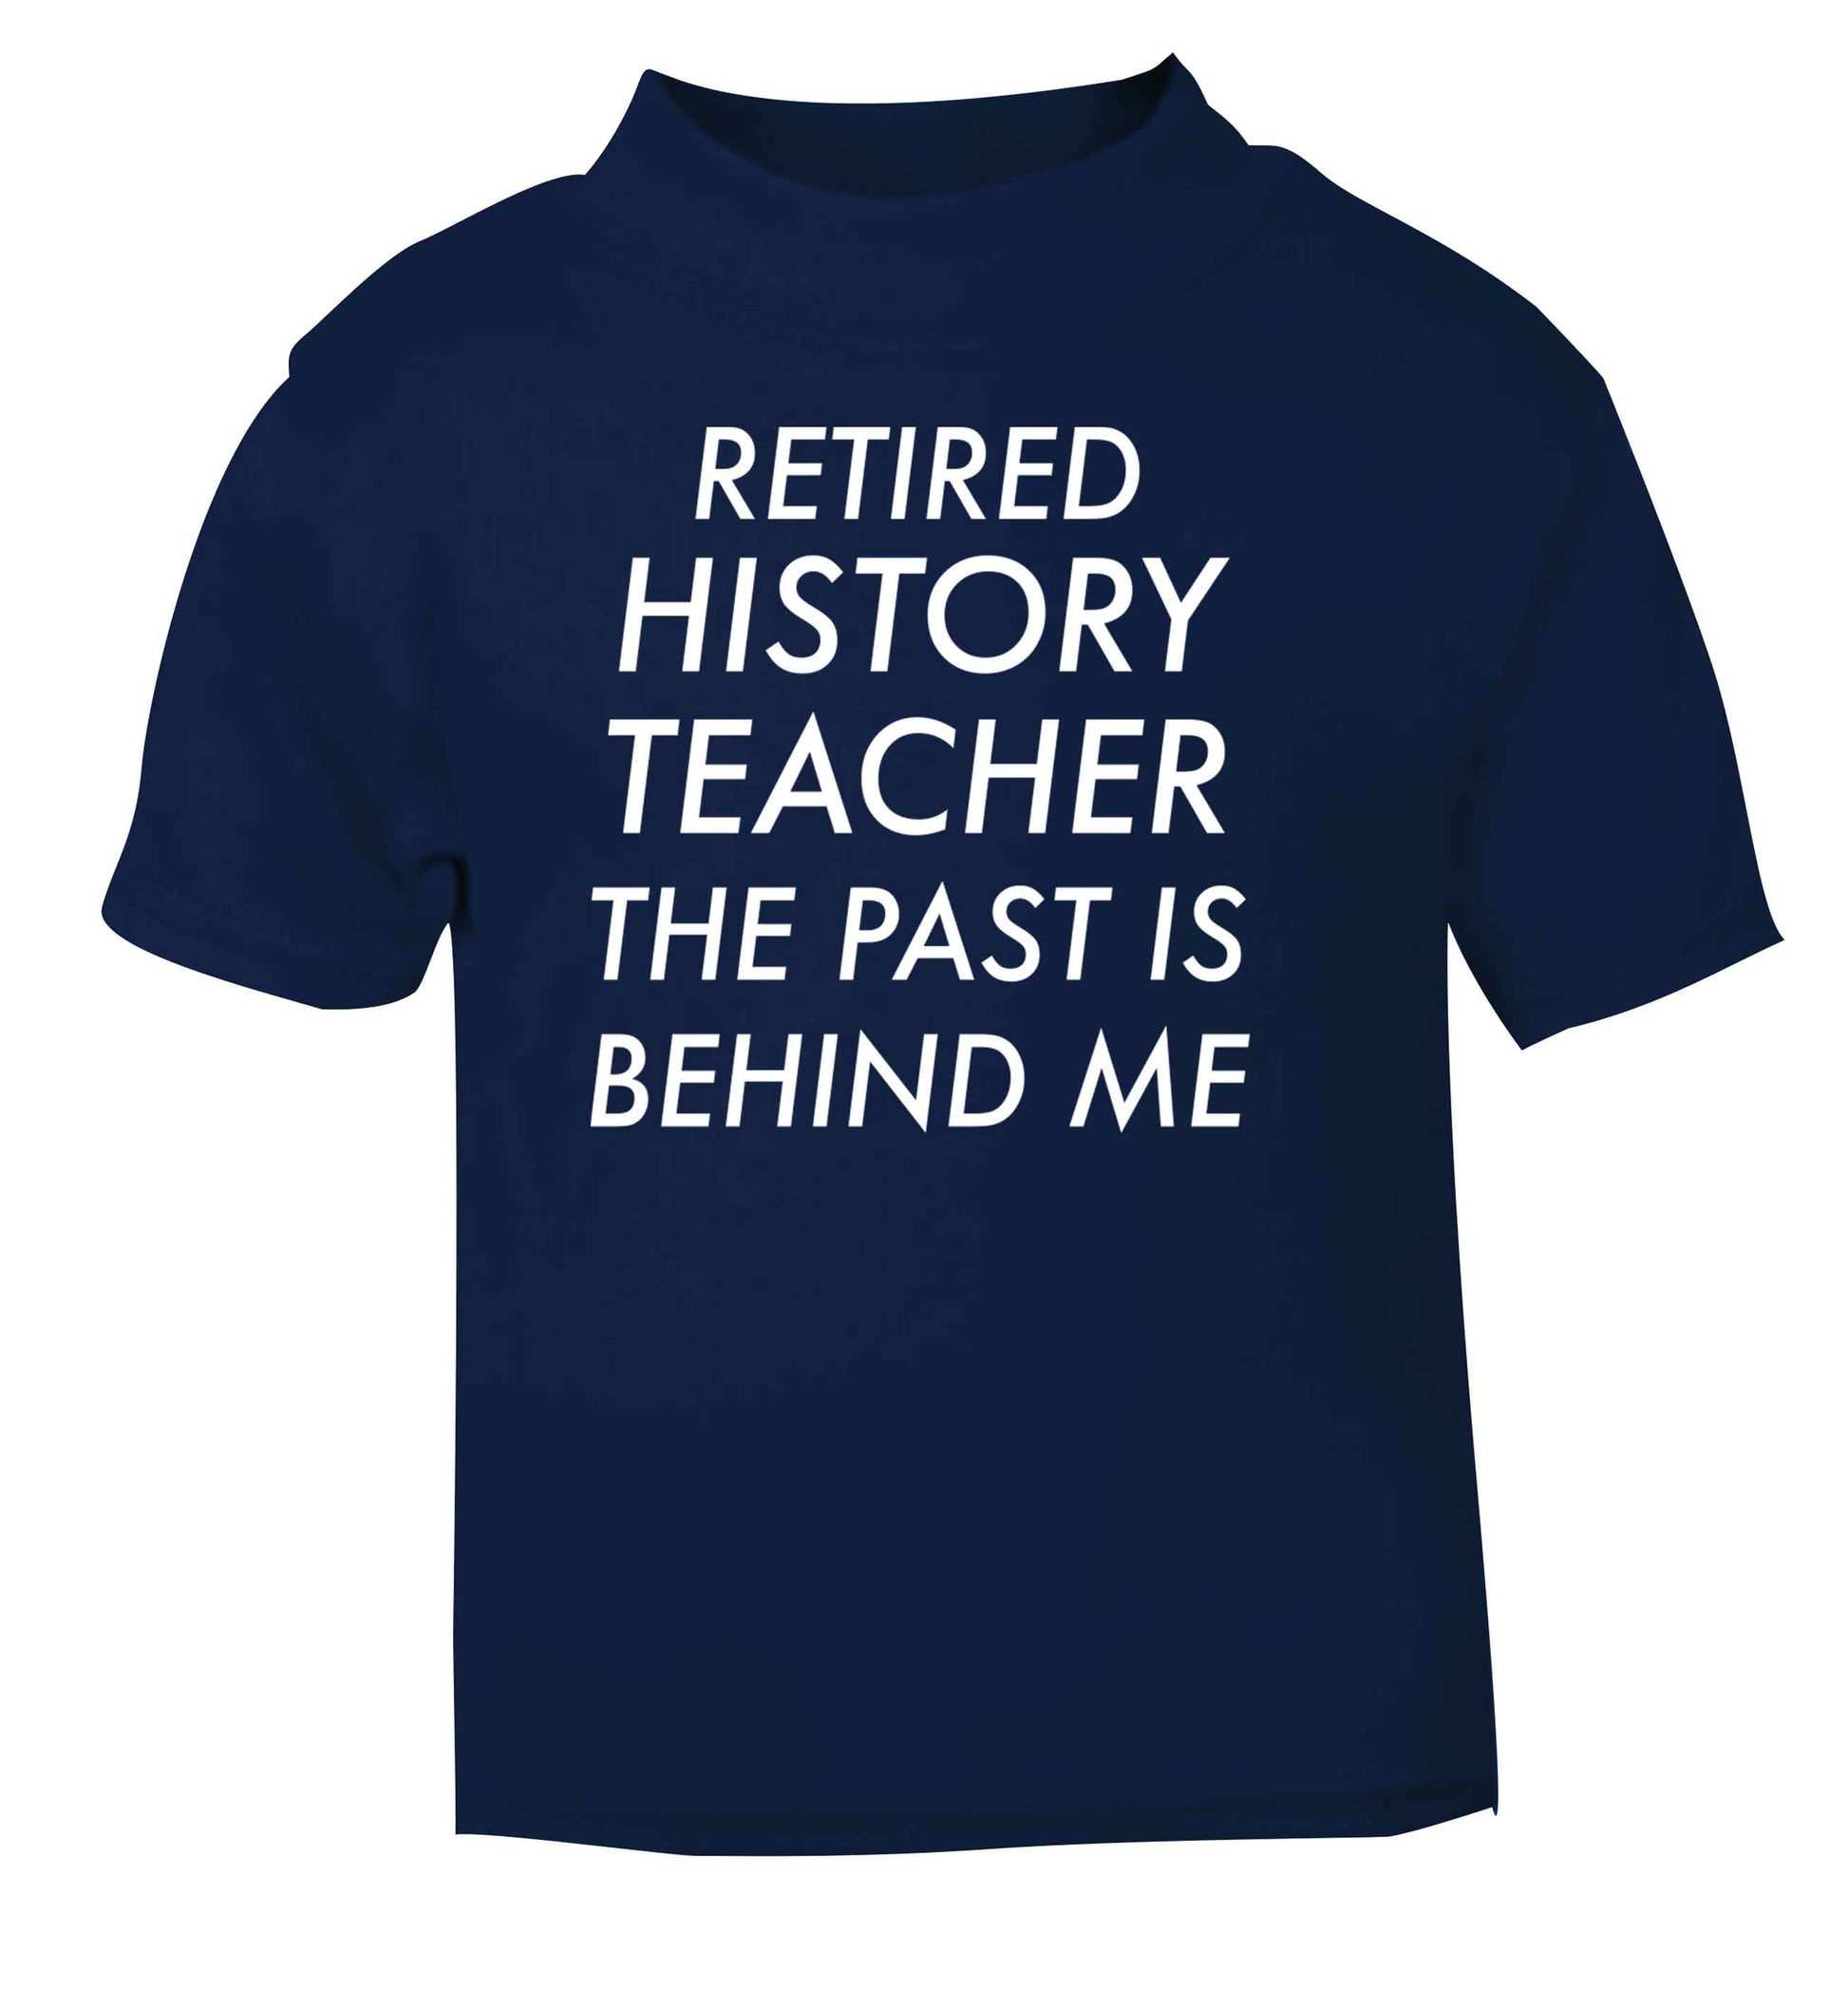 Retired history teacher the past is behind me navy Baby Toddler Tshirt 2 Years